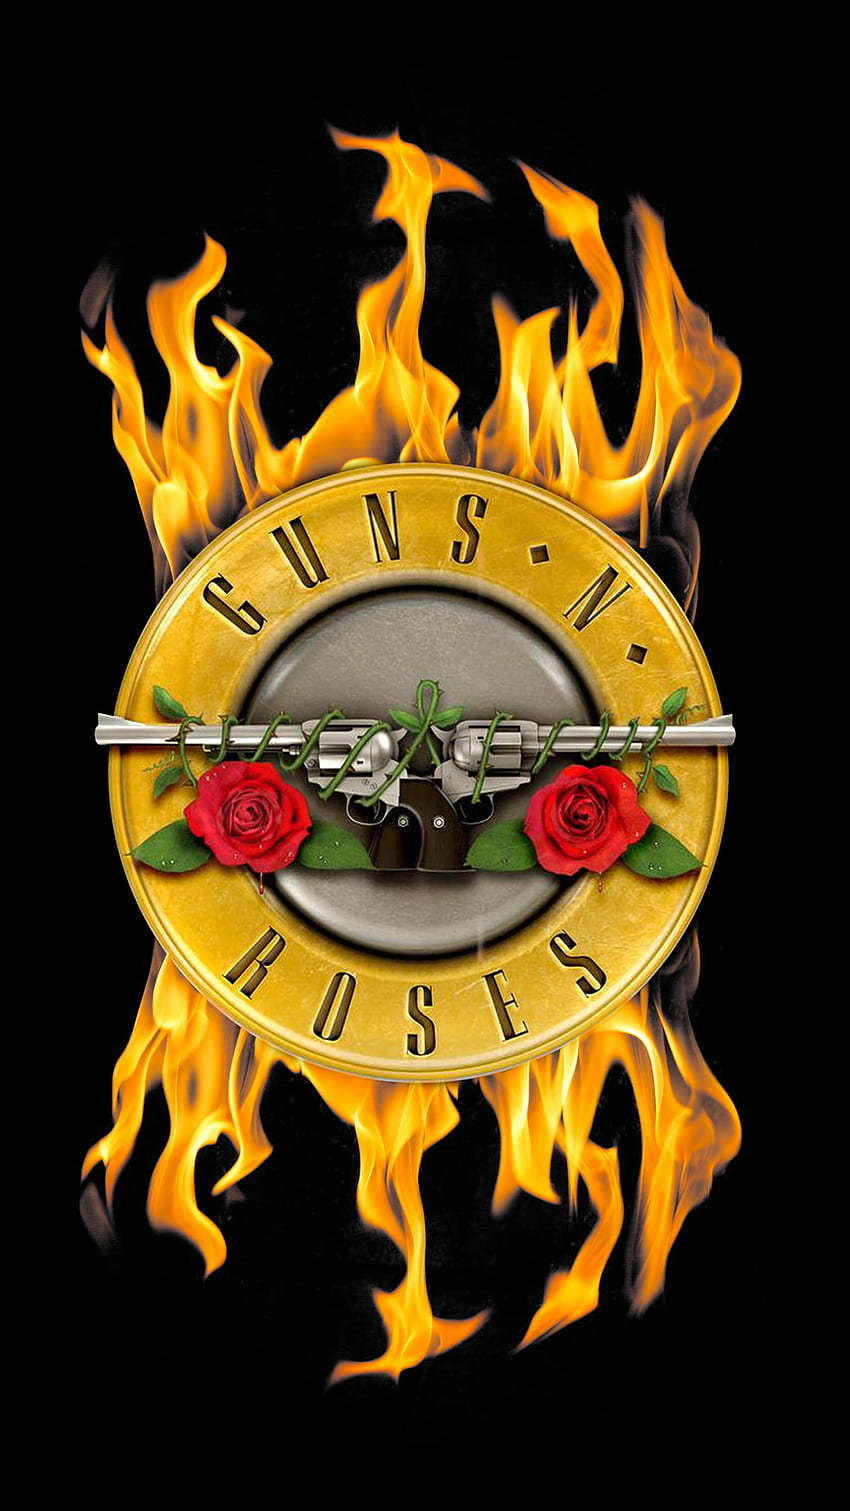 20 Guns N Roses HD Wallpapers and Backgrounds